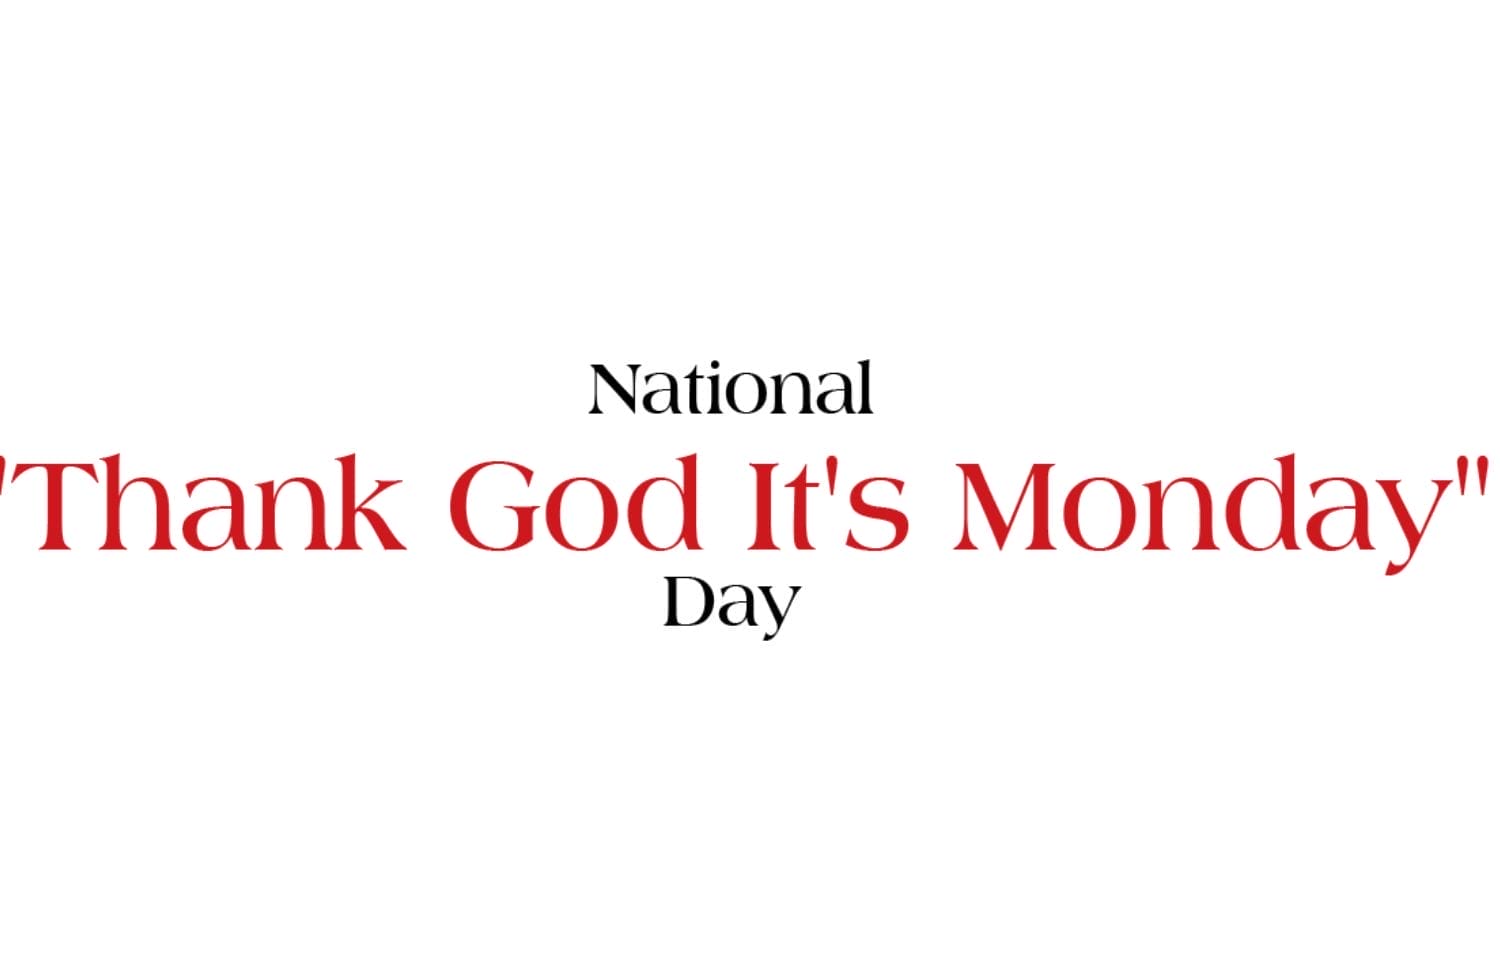 National Thank God It's Monday Day